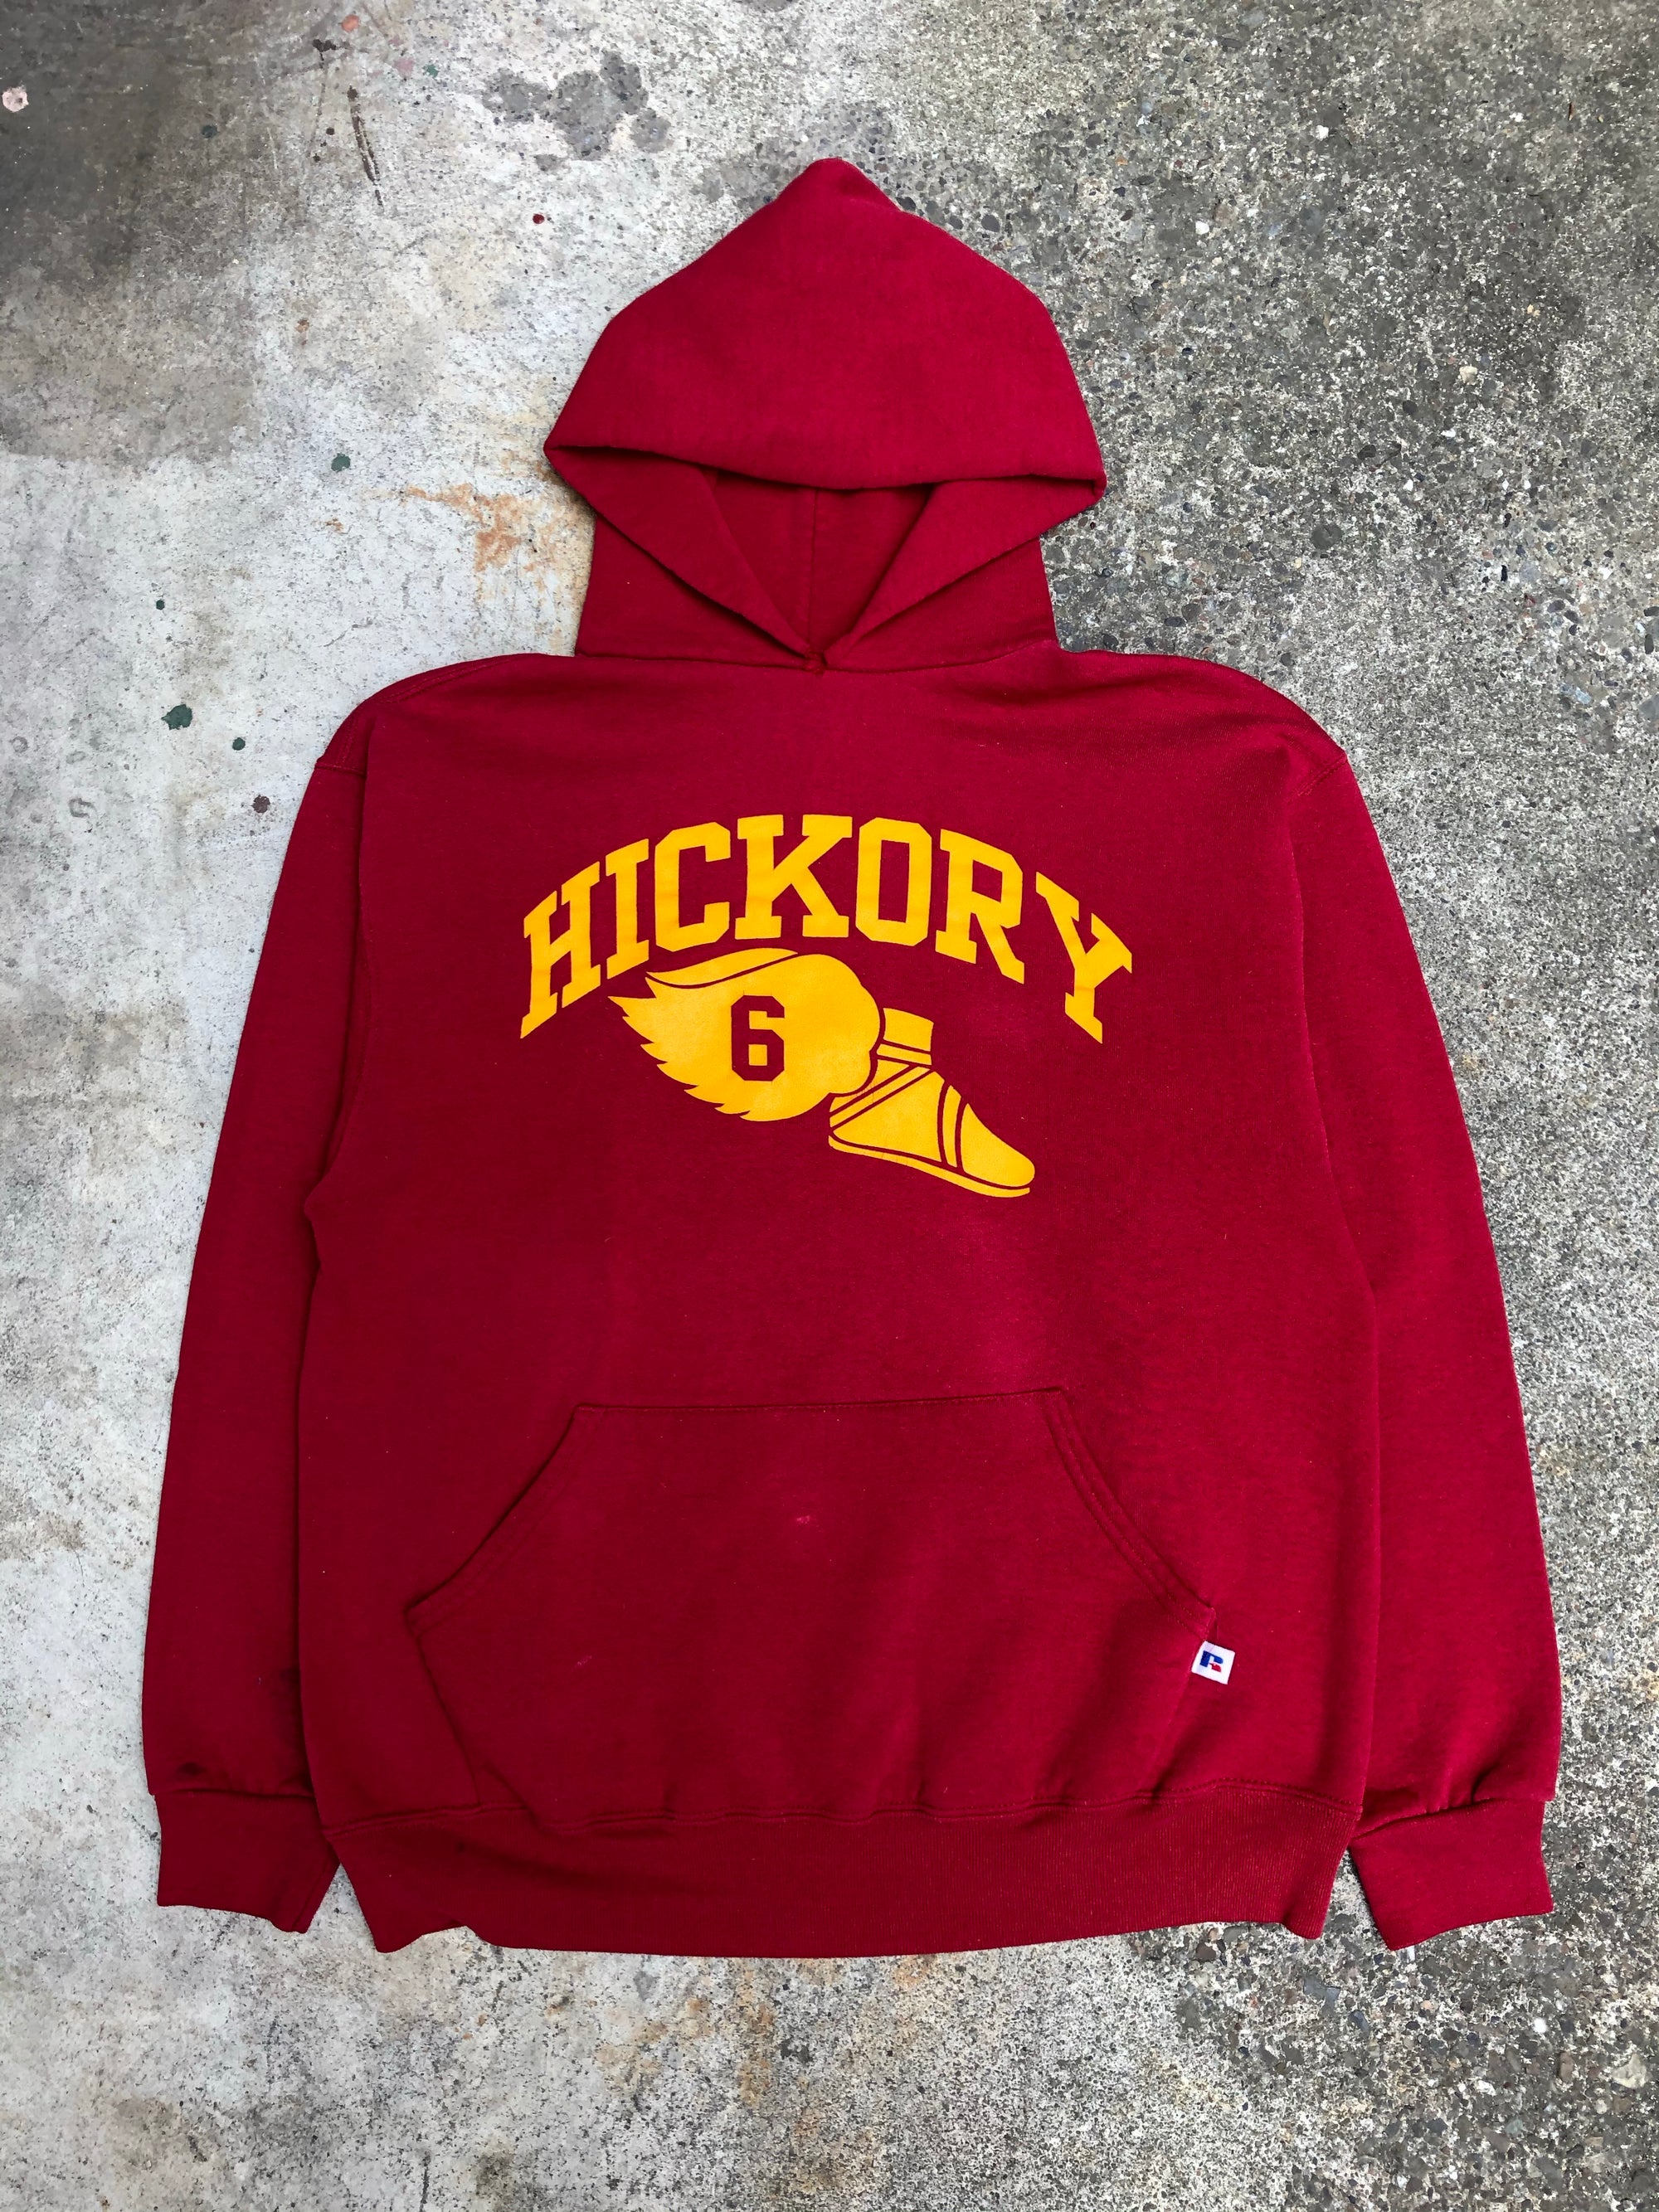 1990s Russell Red “Hickory” Hoodie